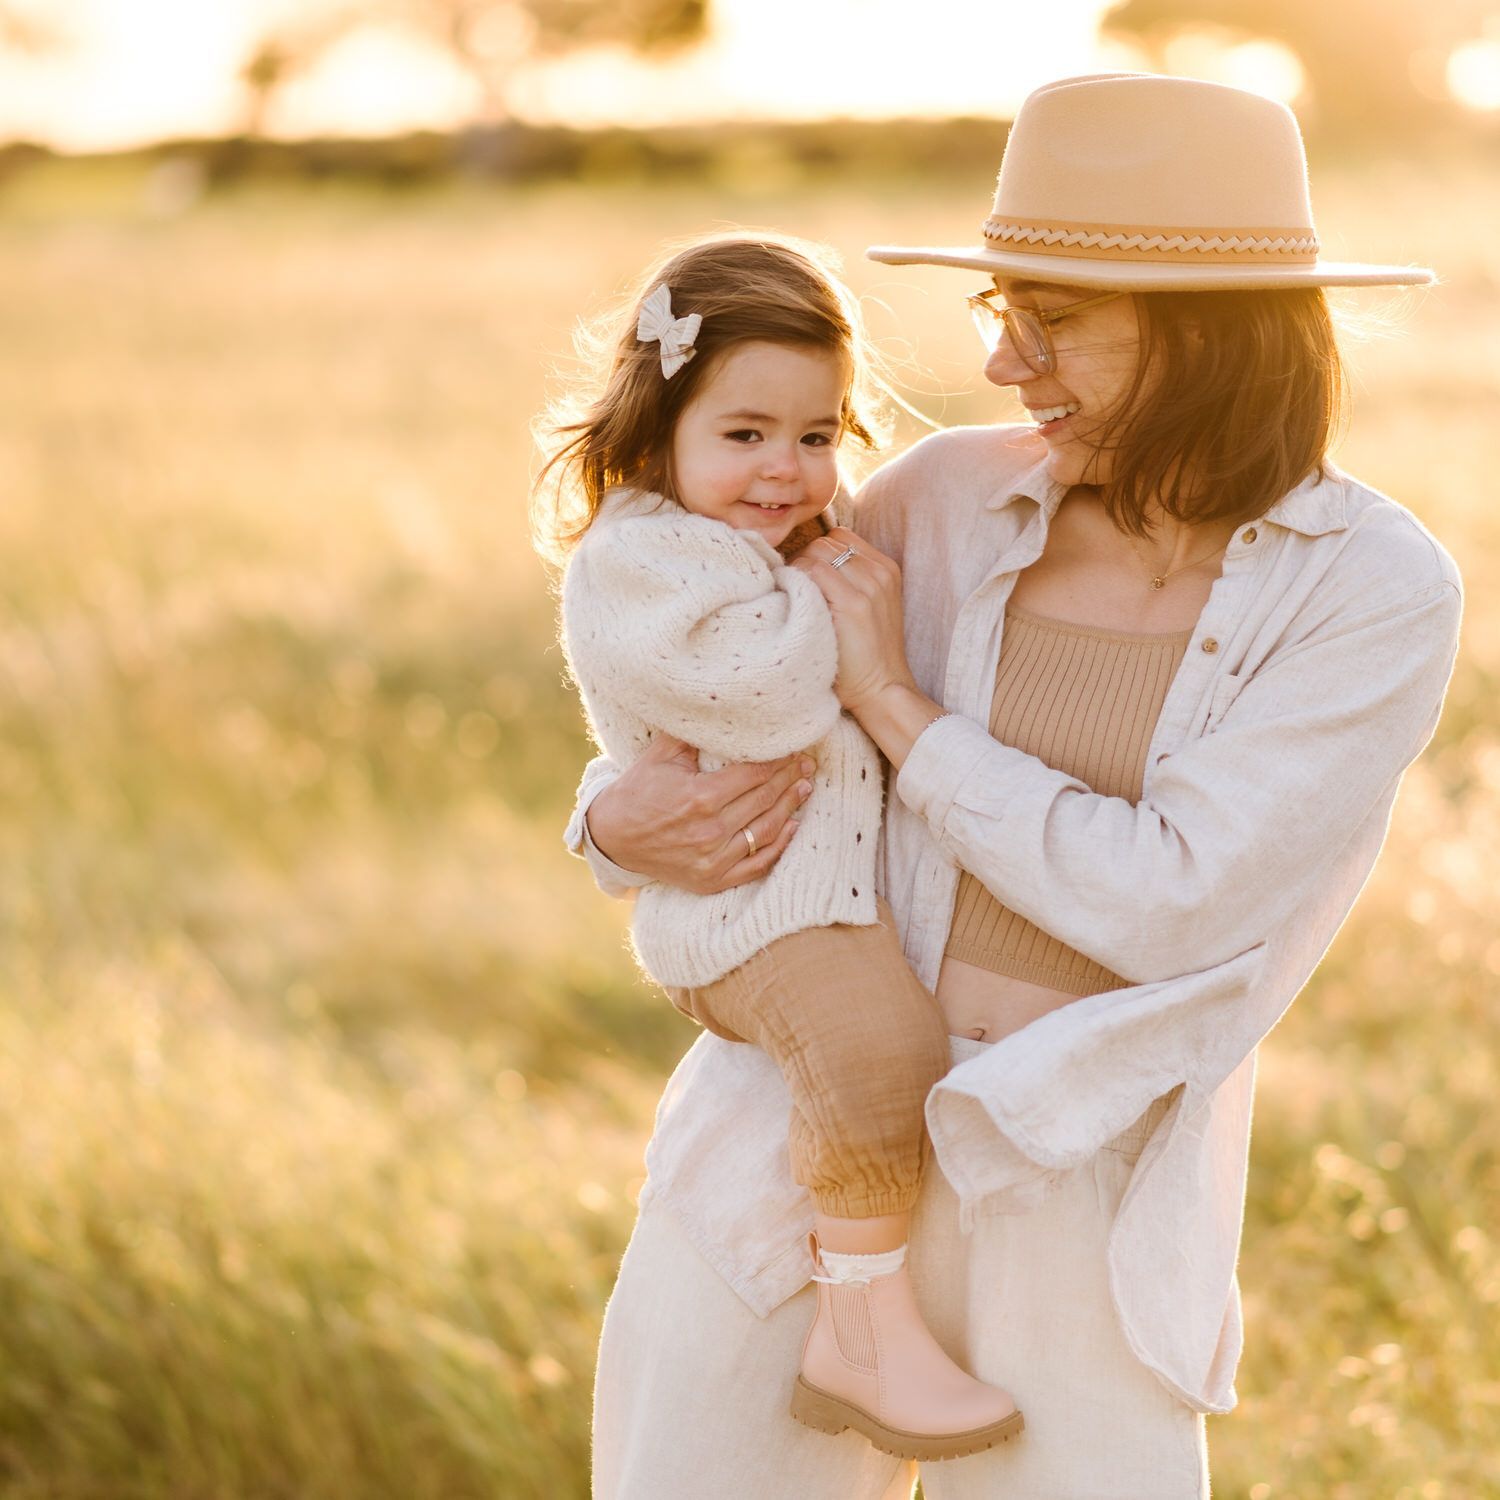 A woman in a hat is holding a little girl in her arms in a field.